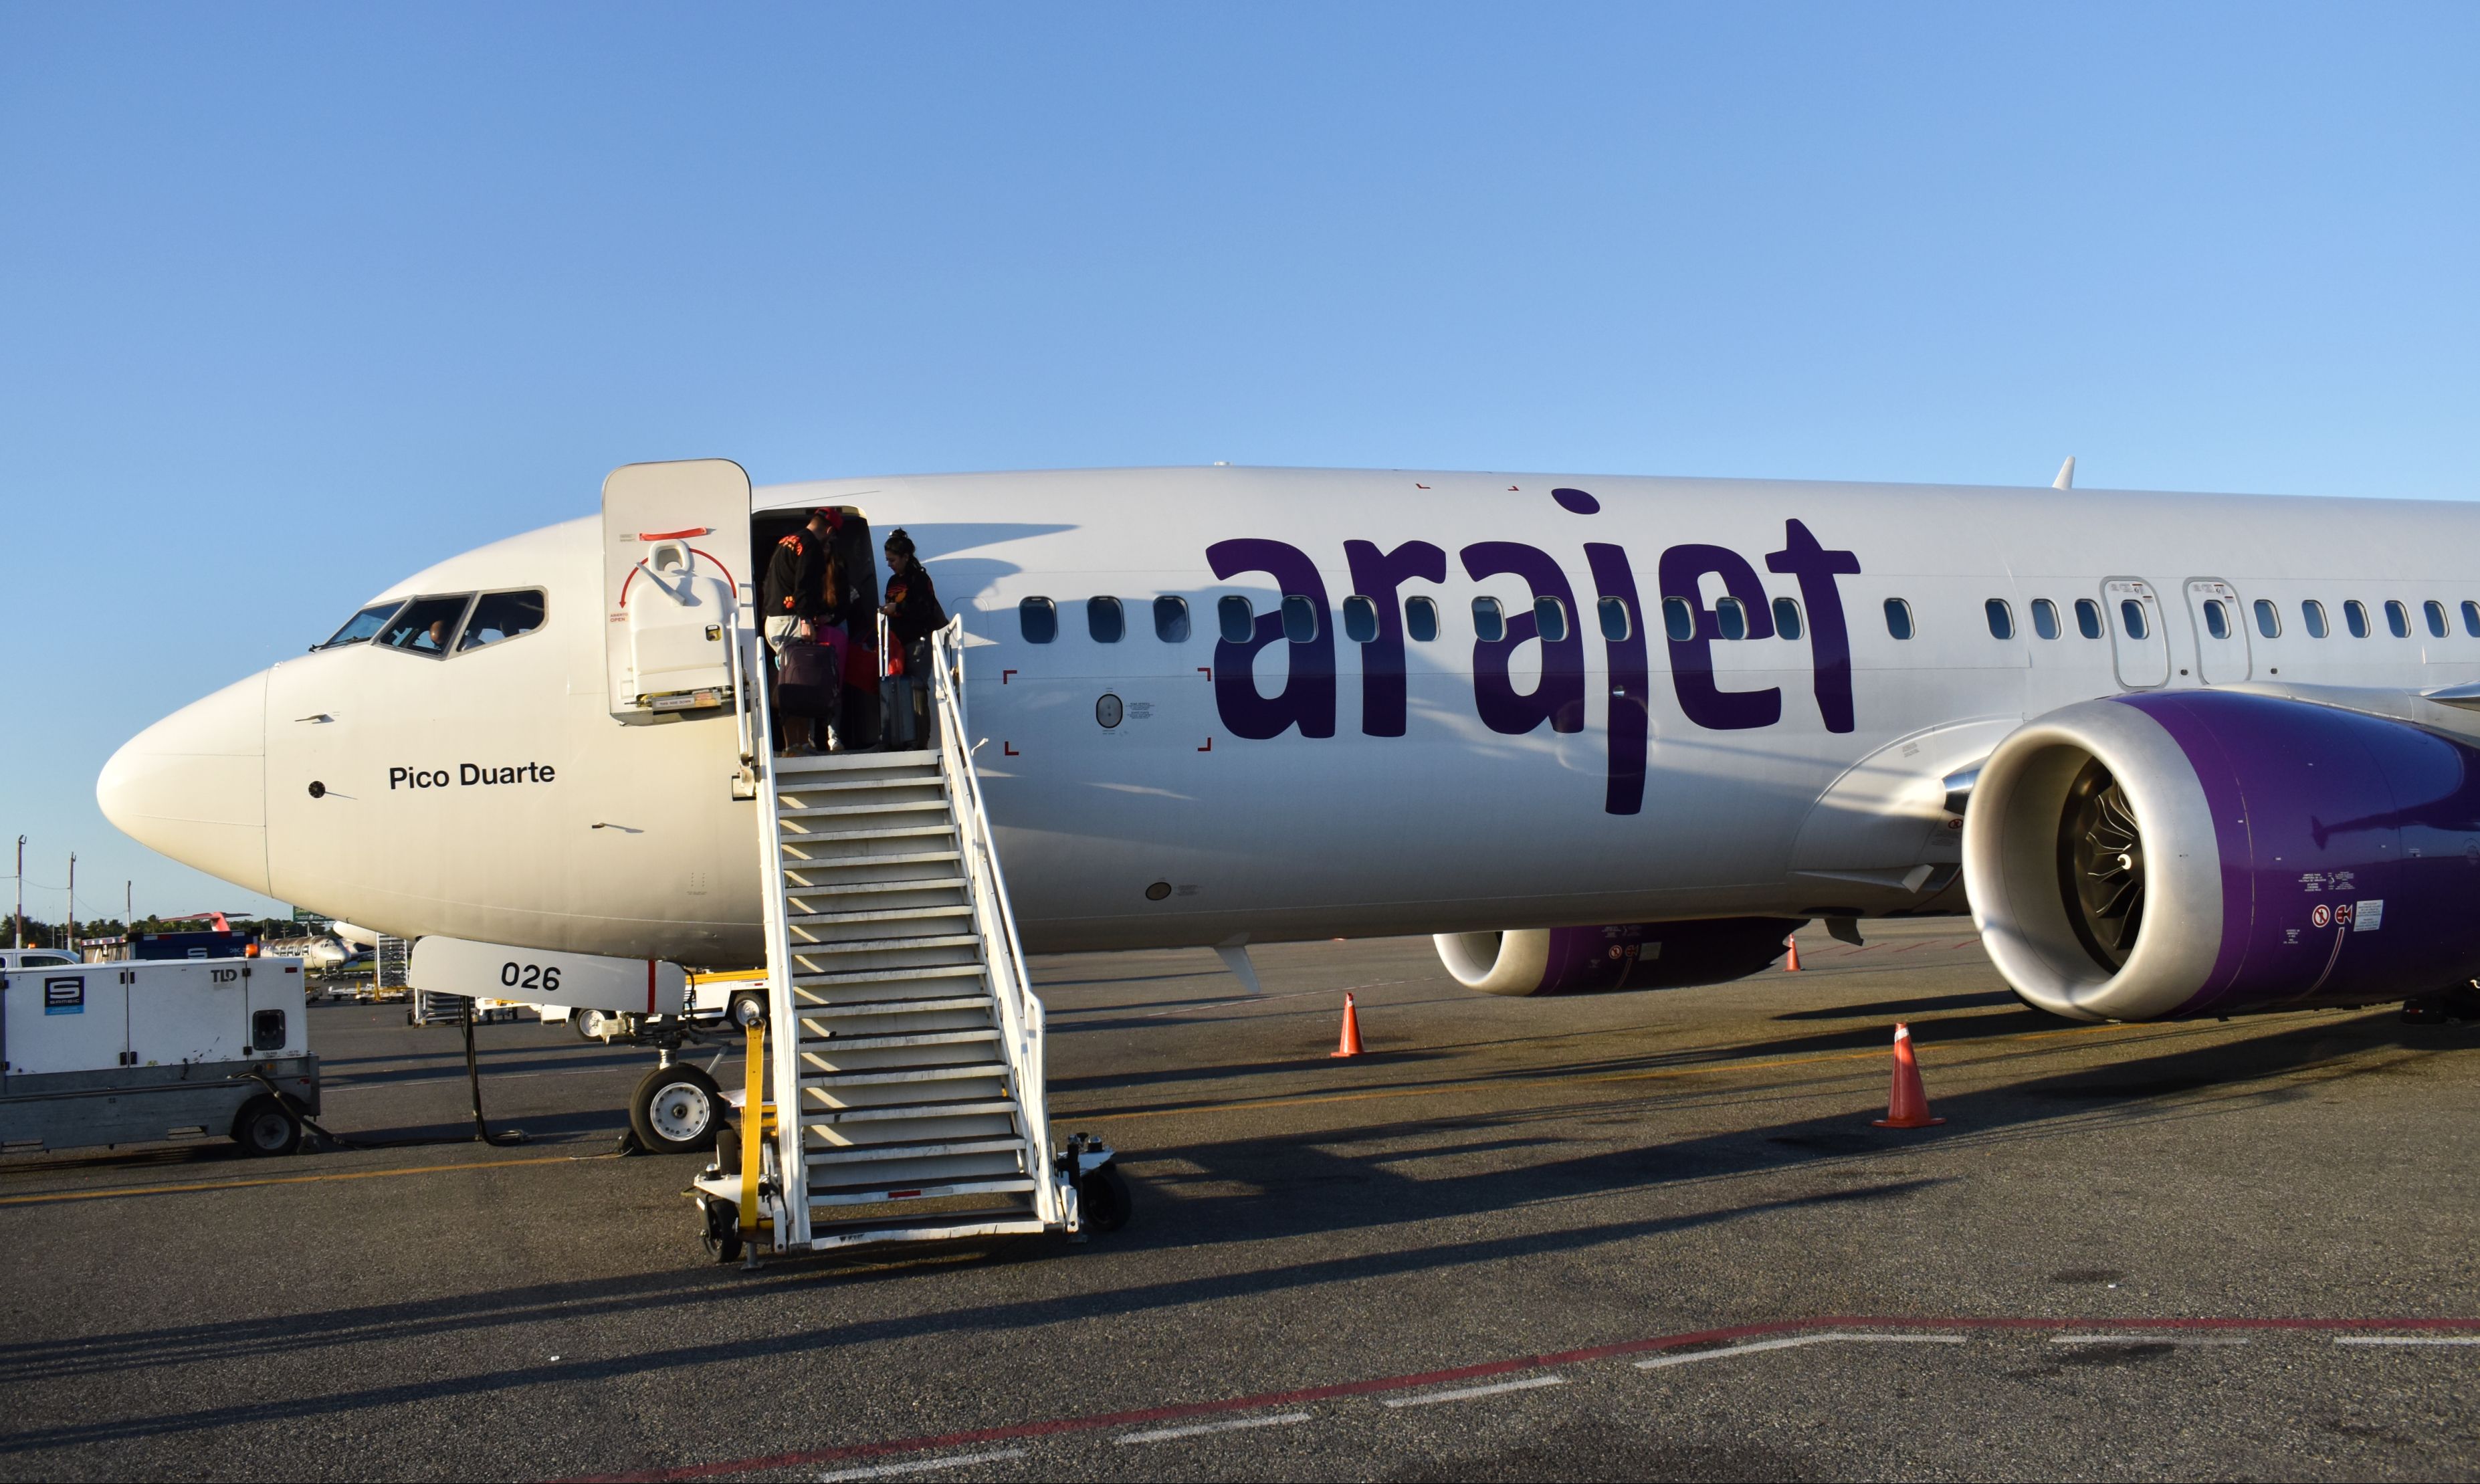 An Arajet Boeing 737 MAX parked in Santo Domingo